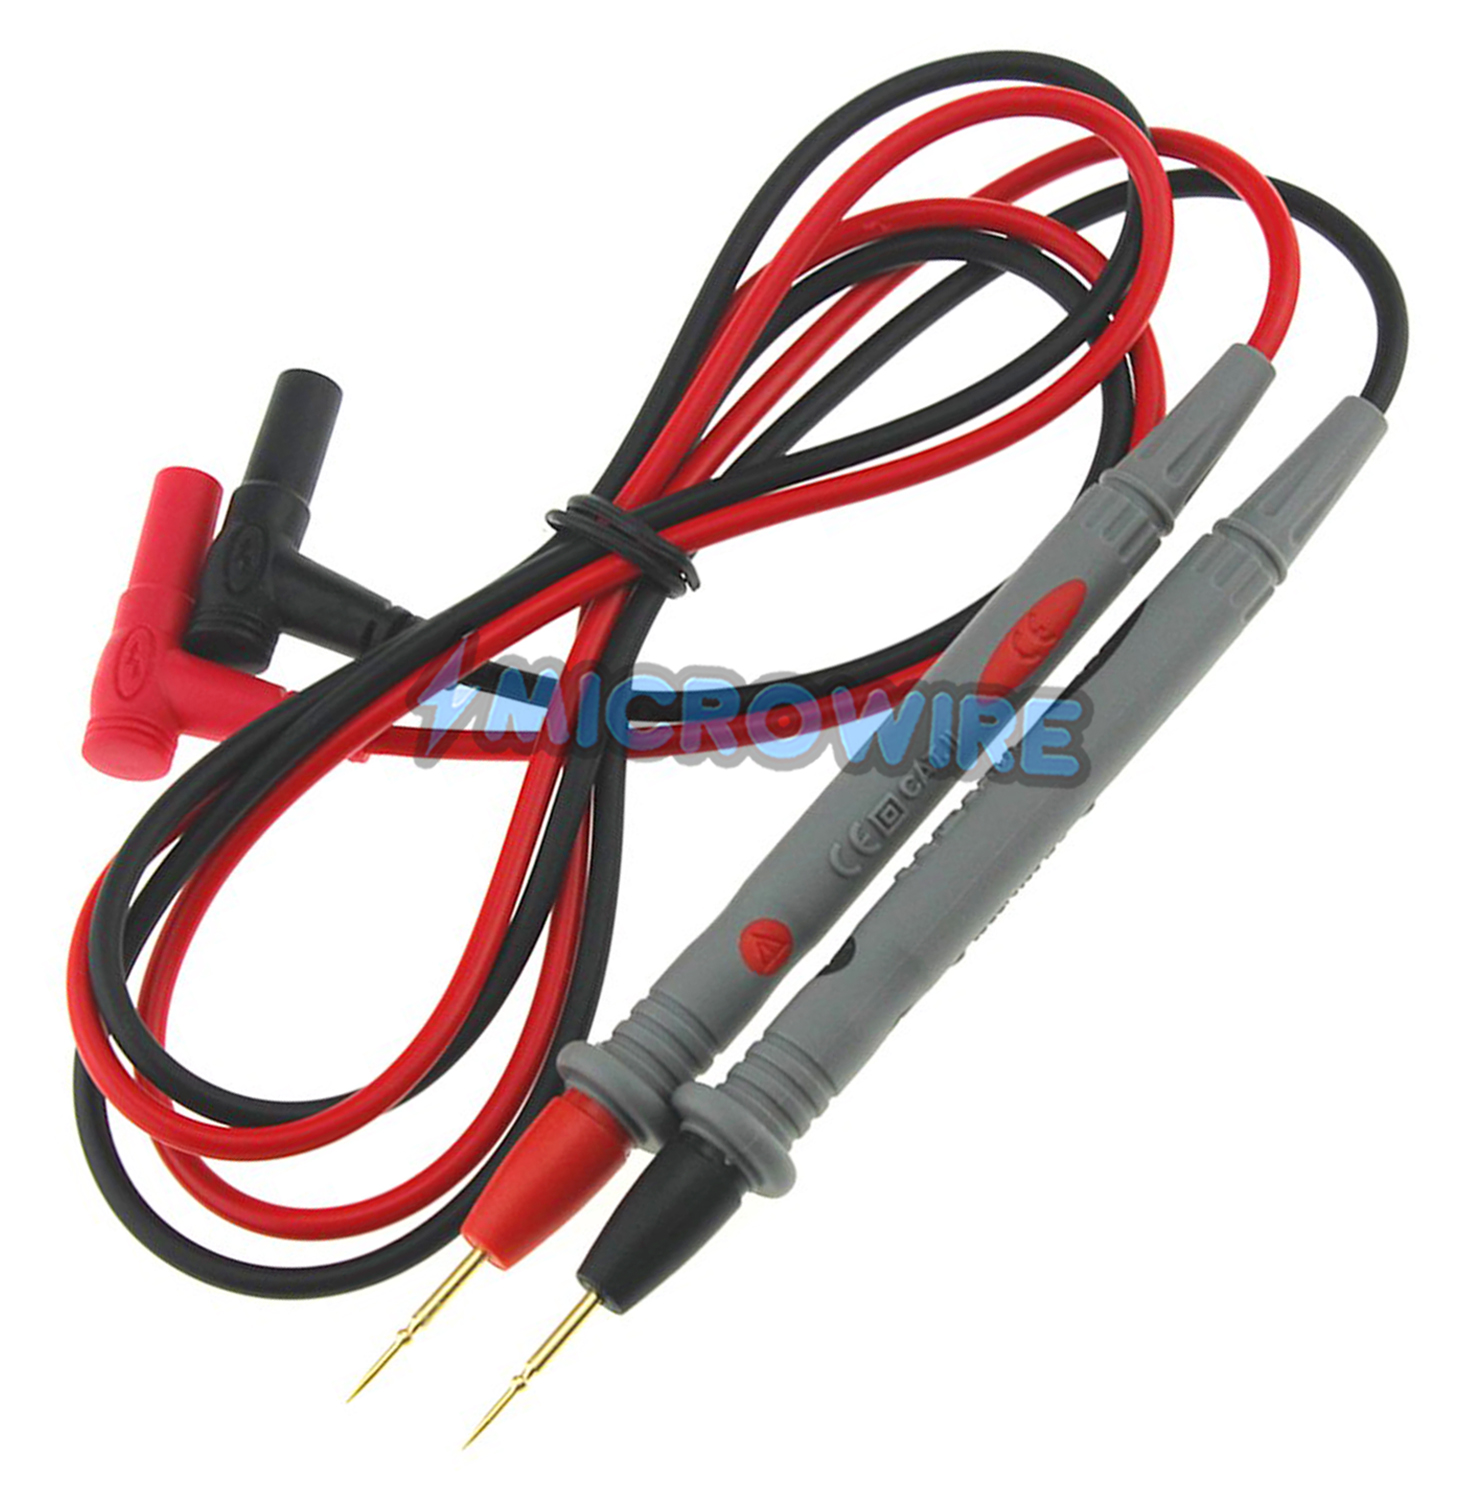 ANENG PT1035 Digital Multimeter Test Leads Universal Cable Needle Tip  Voltmeter Multi Meter Tester Lead Probe Wire Pen Wire